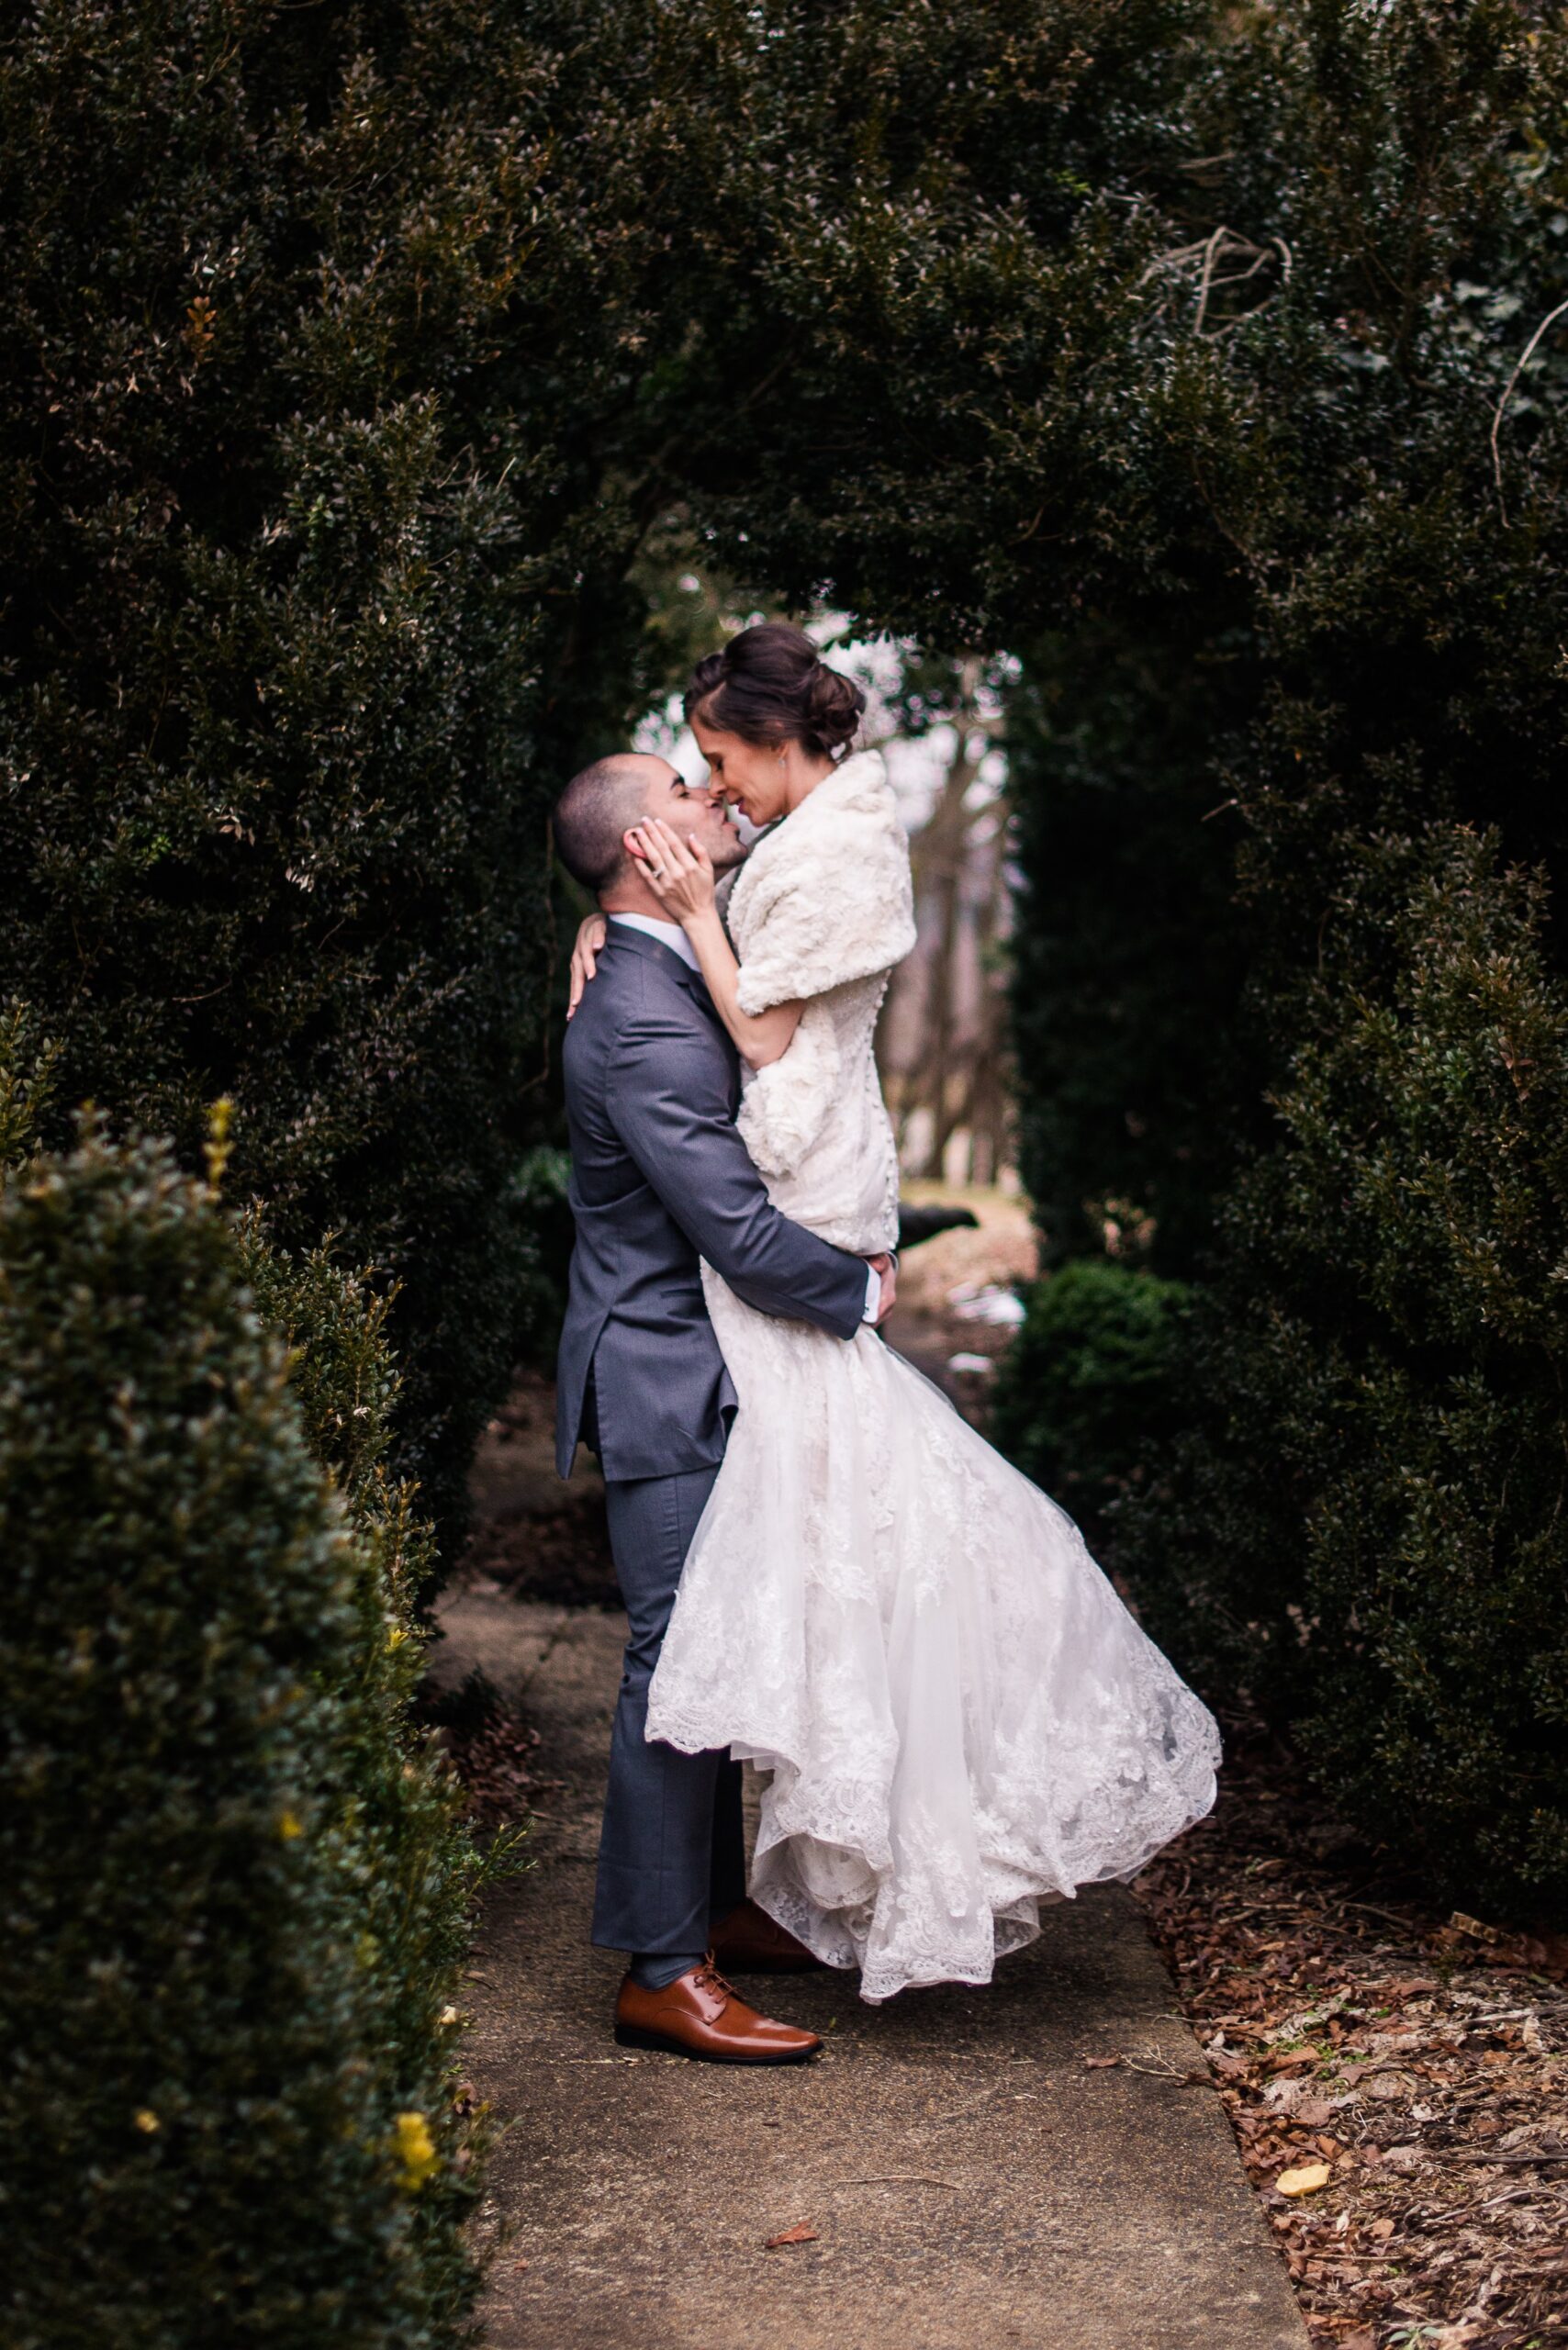 A bride and groom lean in for a kiss while in the gardens during their wedding at Raspberry Plain Manor in Loudoun County Virginia